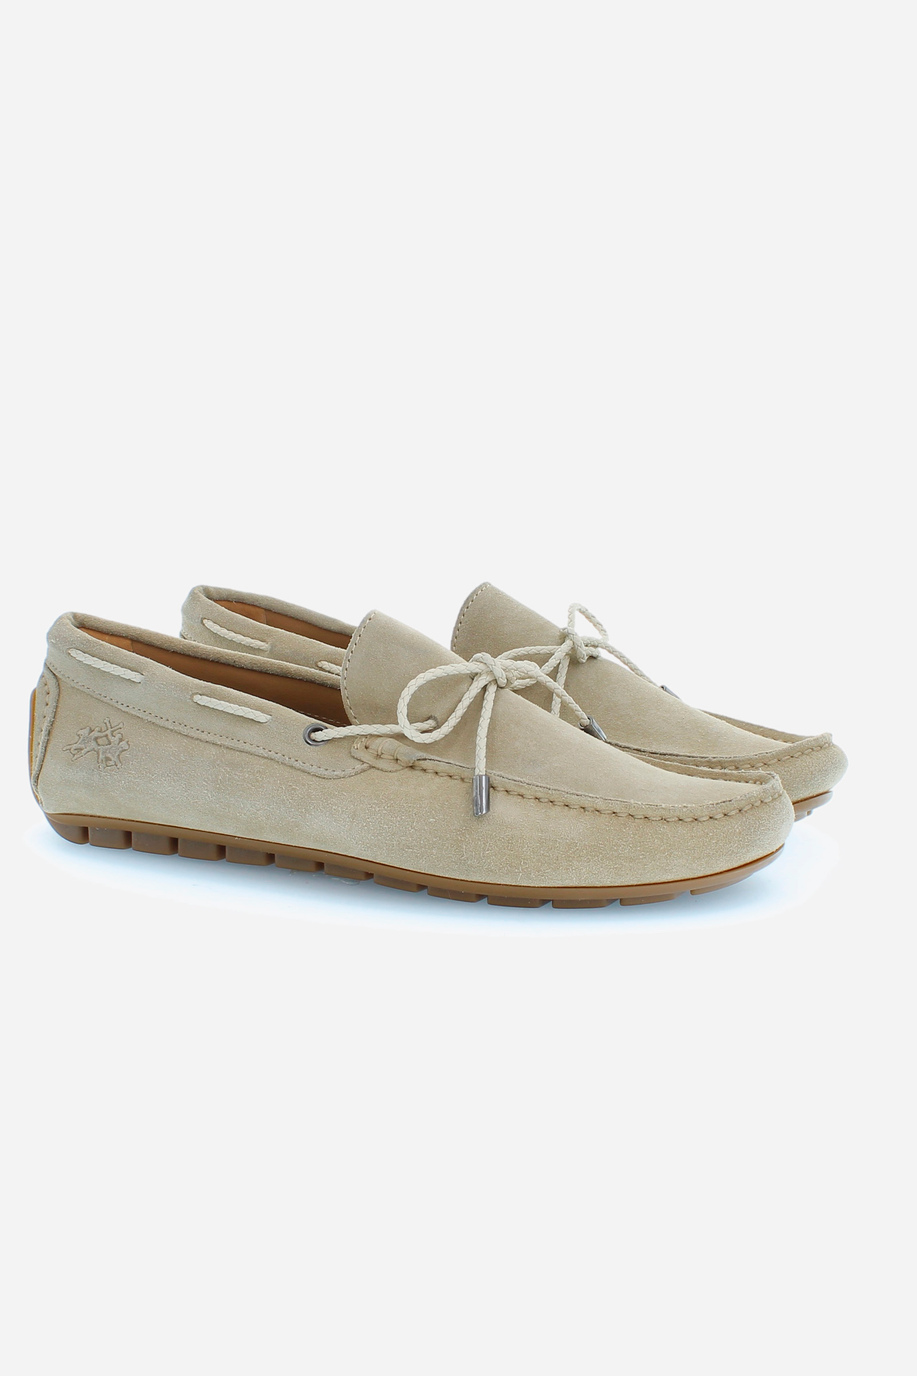 Men's suede loafers with laces - Shoes and Accessories | La Martina - Official Online Shop